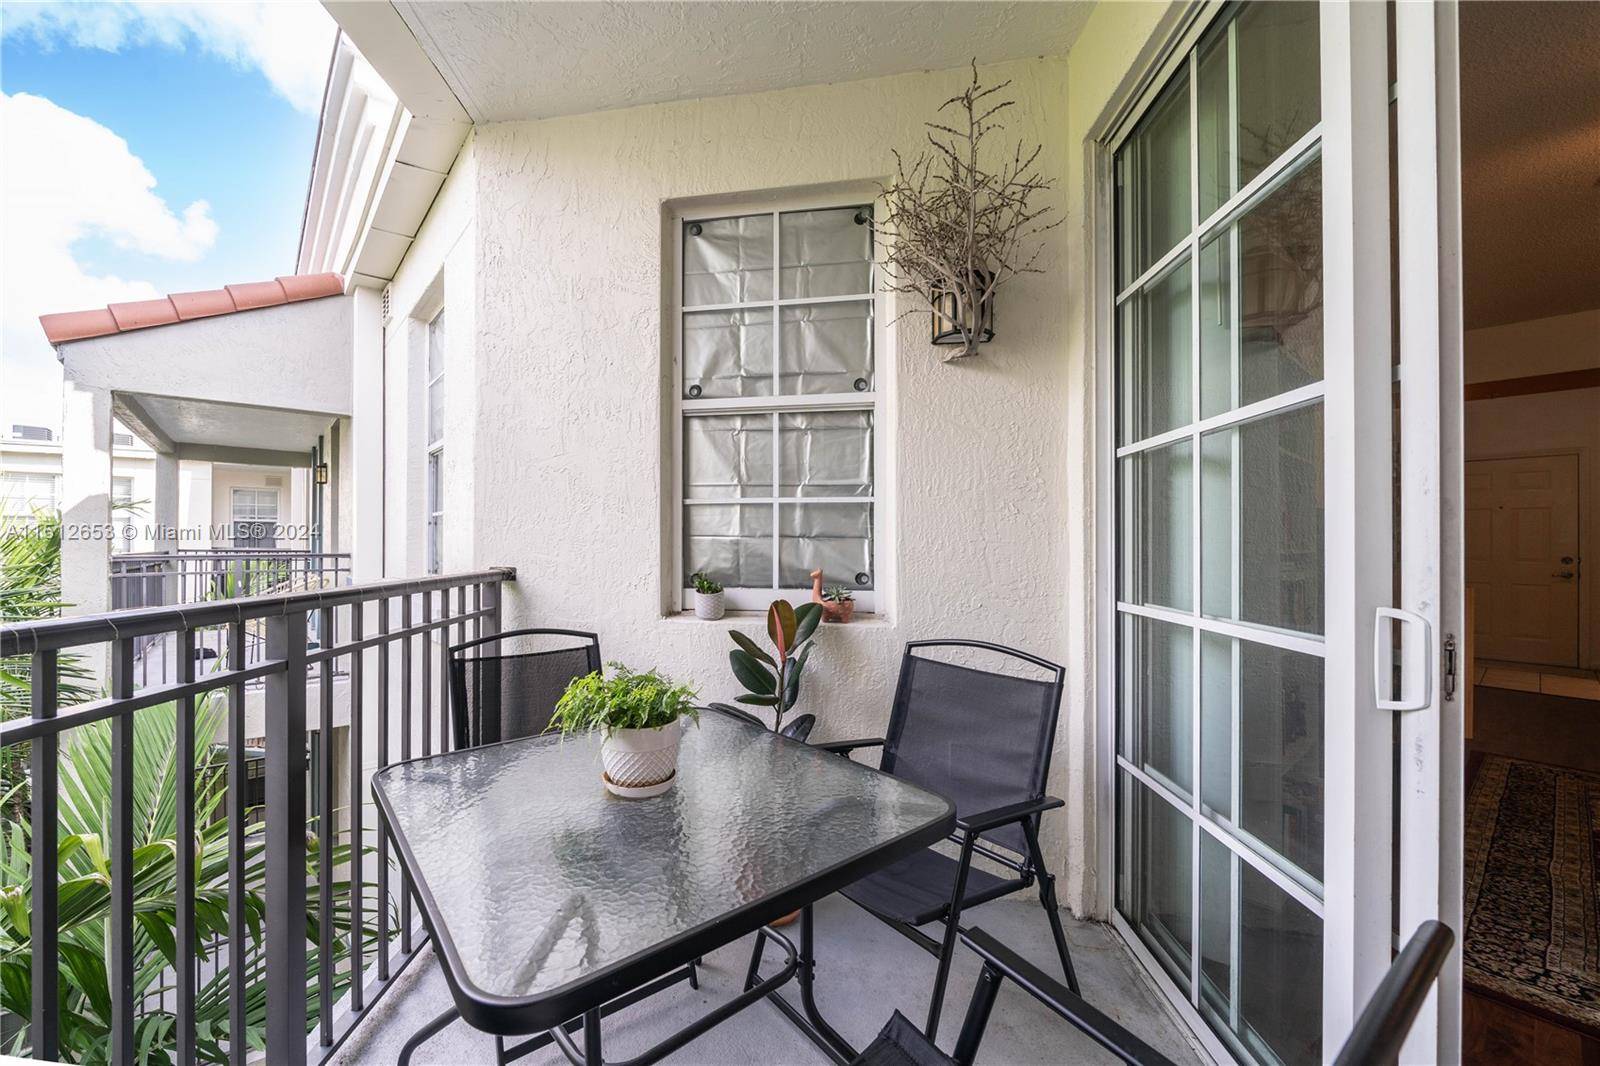 BEAUTIFUL CORNER UNIT IN SOLE, 2 2 WITH BALCONY OVERLOOKING GARDEN AND COURTYARD.